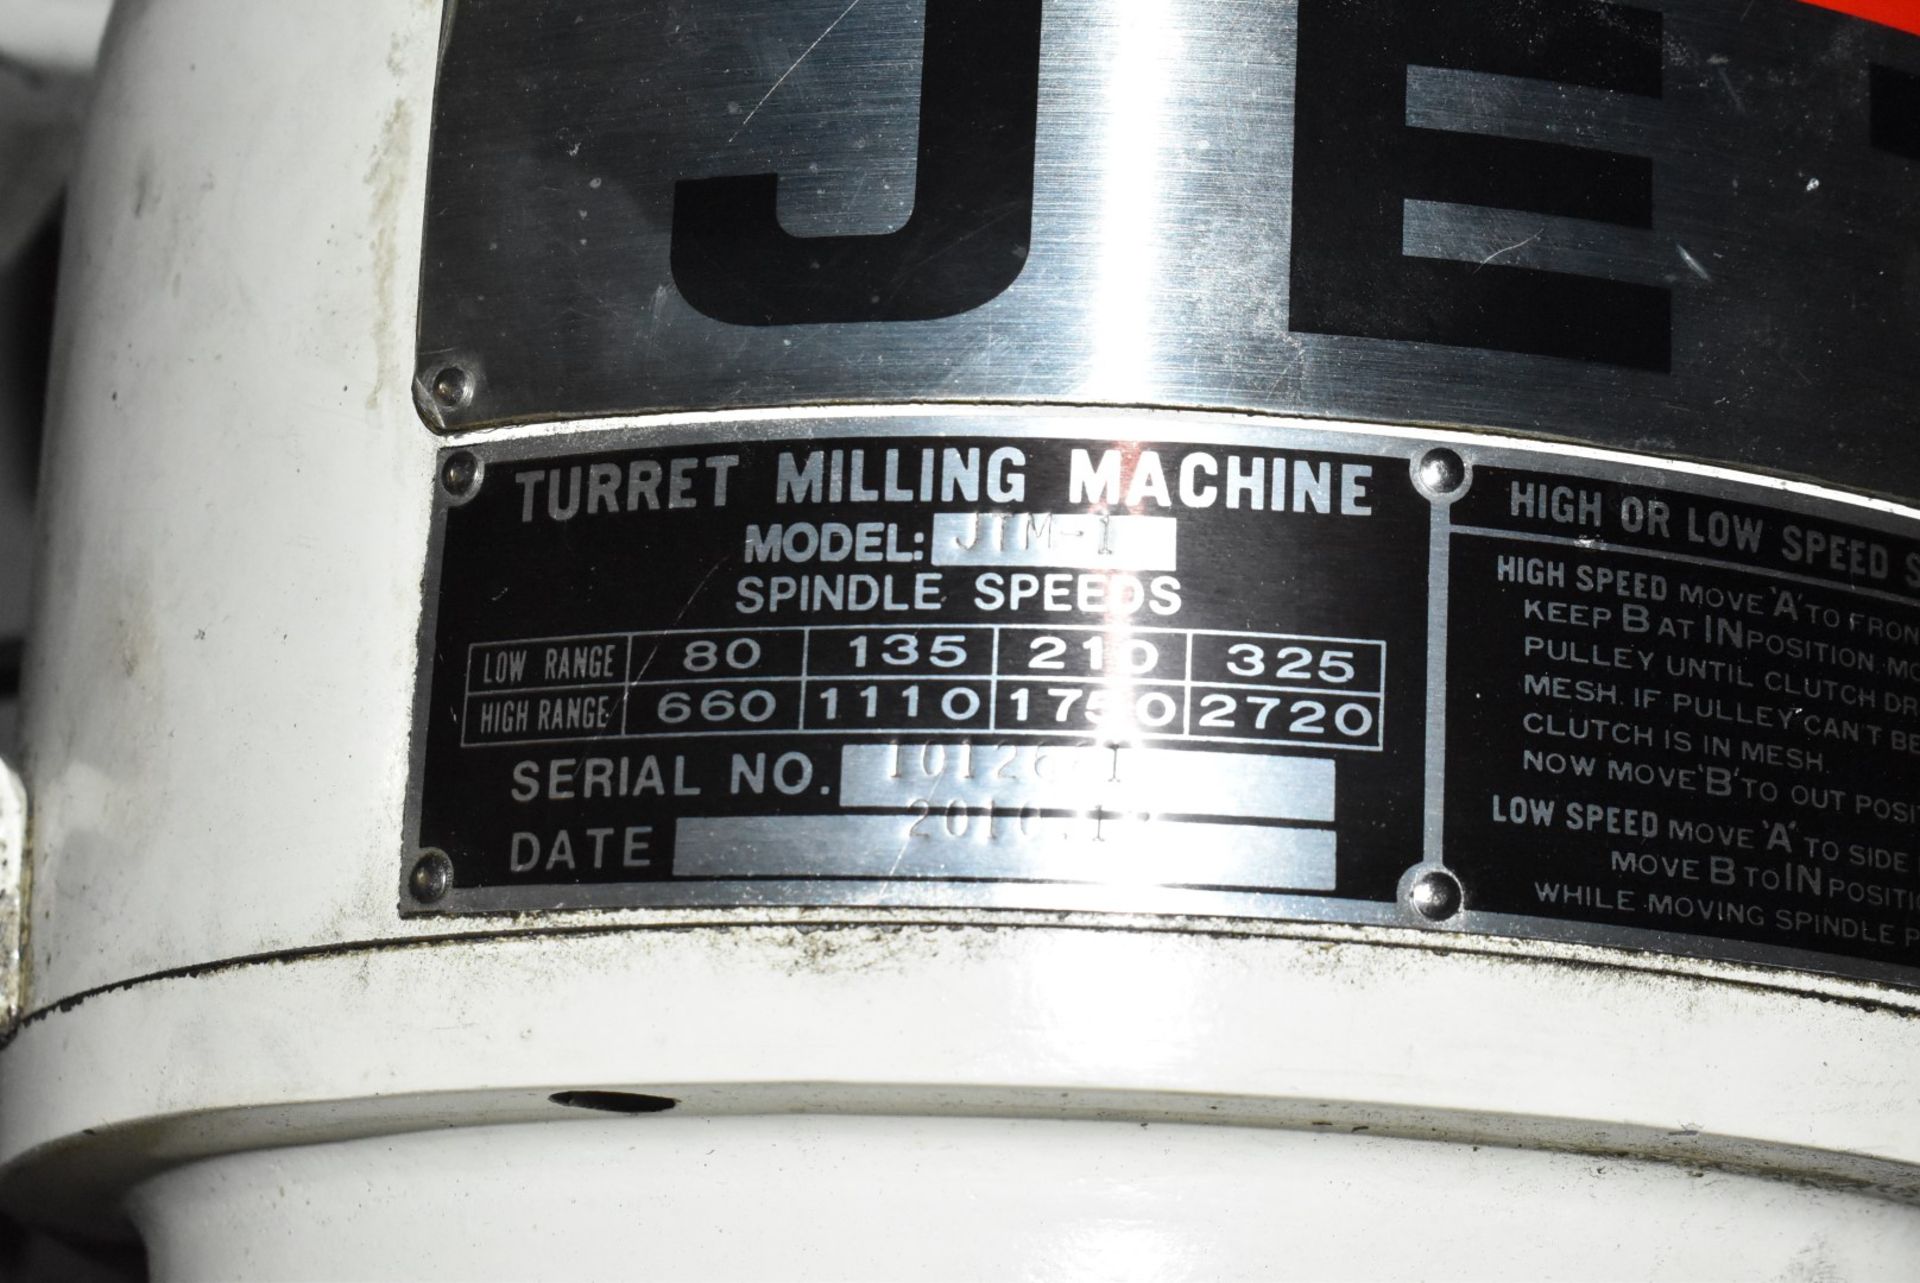 JET (2010) JTM-1 VERTICAL TURRET MILLING MACHINE WITH 9" X 42" TABLE, SPEEDS TO 2720 RPM IN 8 STEPS, - Image 9 of 9